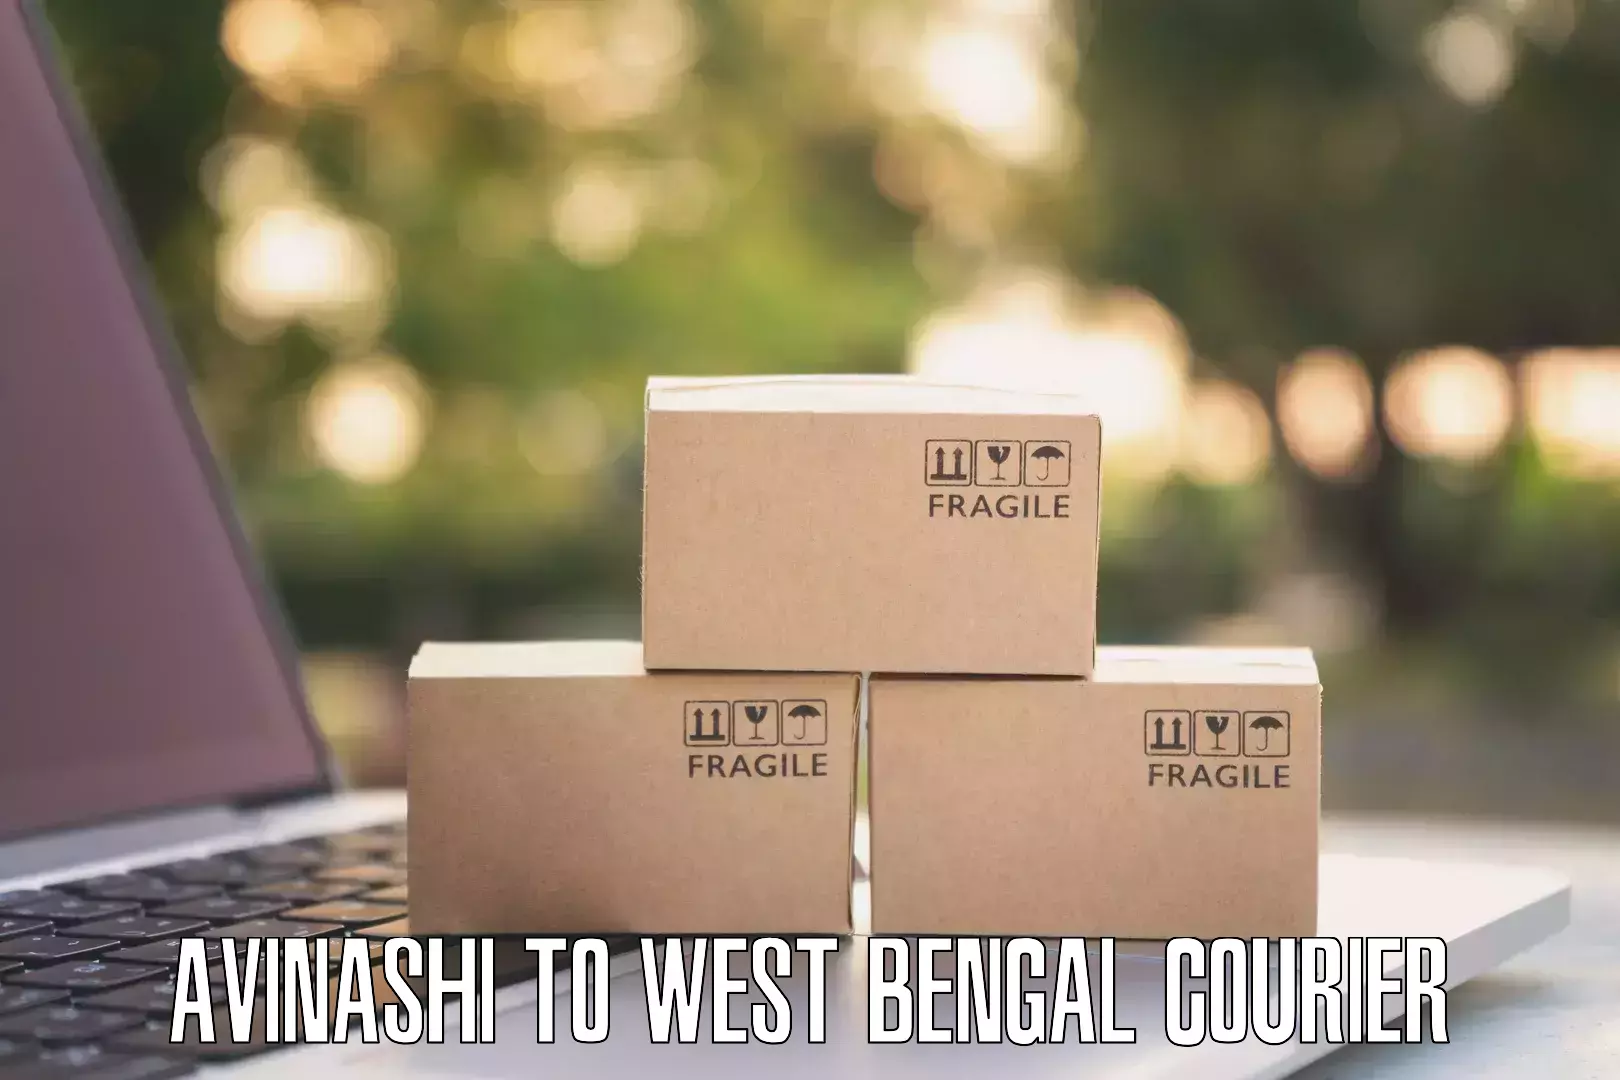 Express delivery network Avinashi to West Bengal